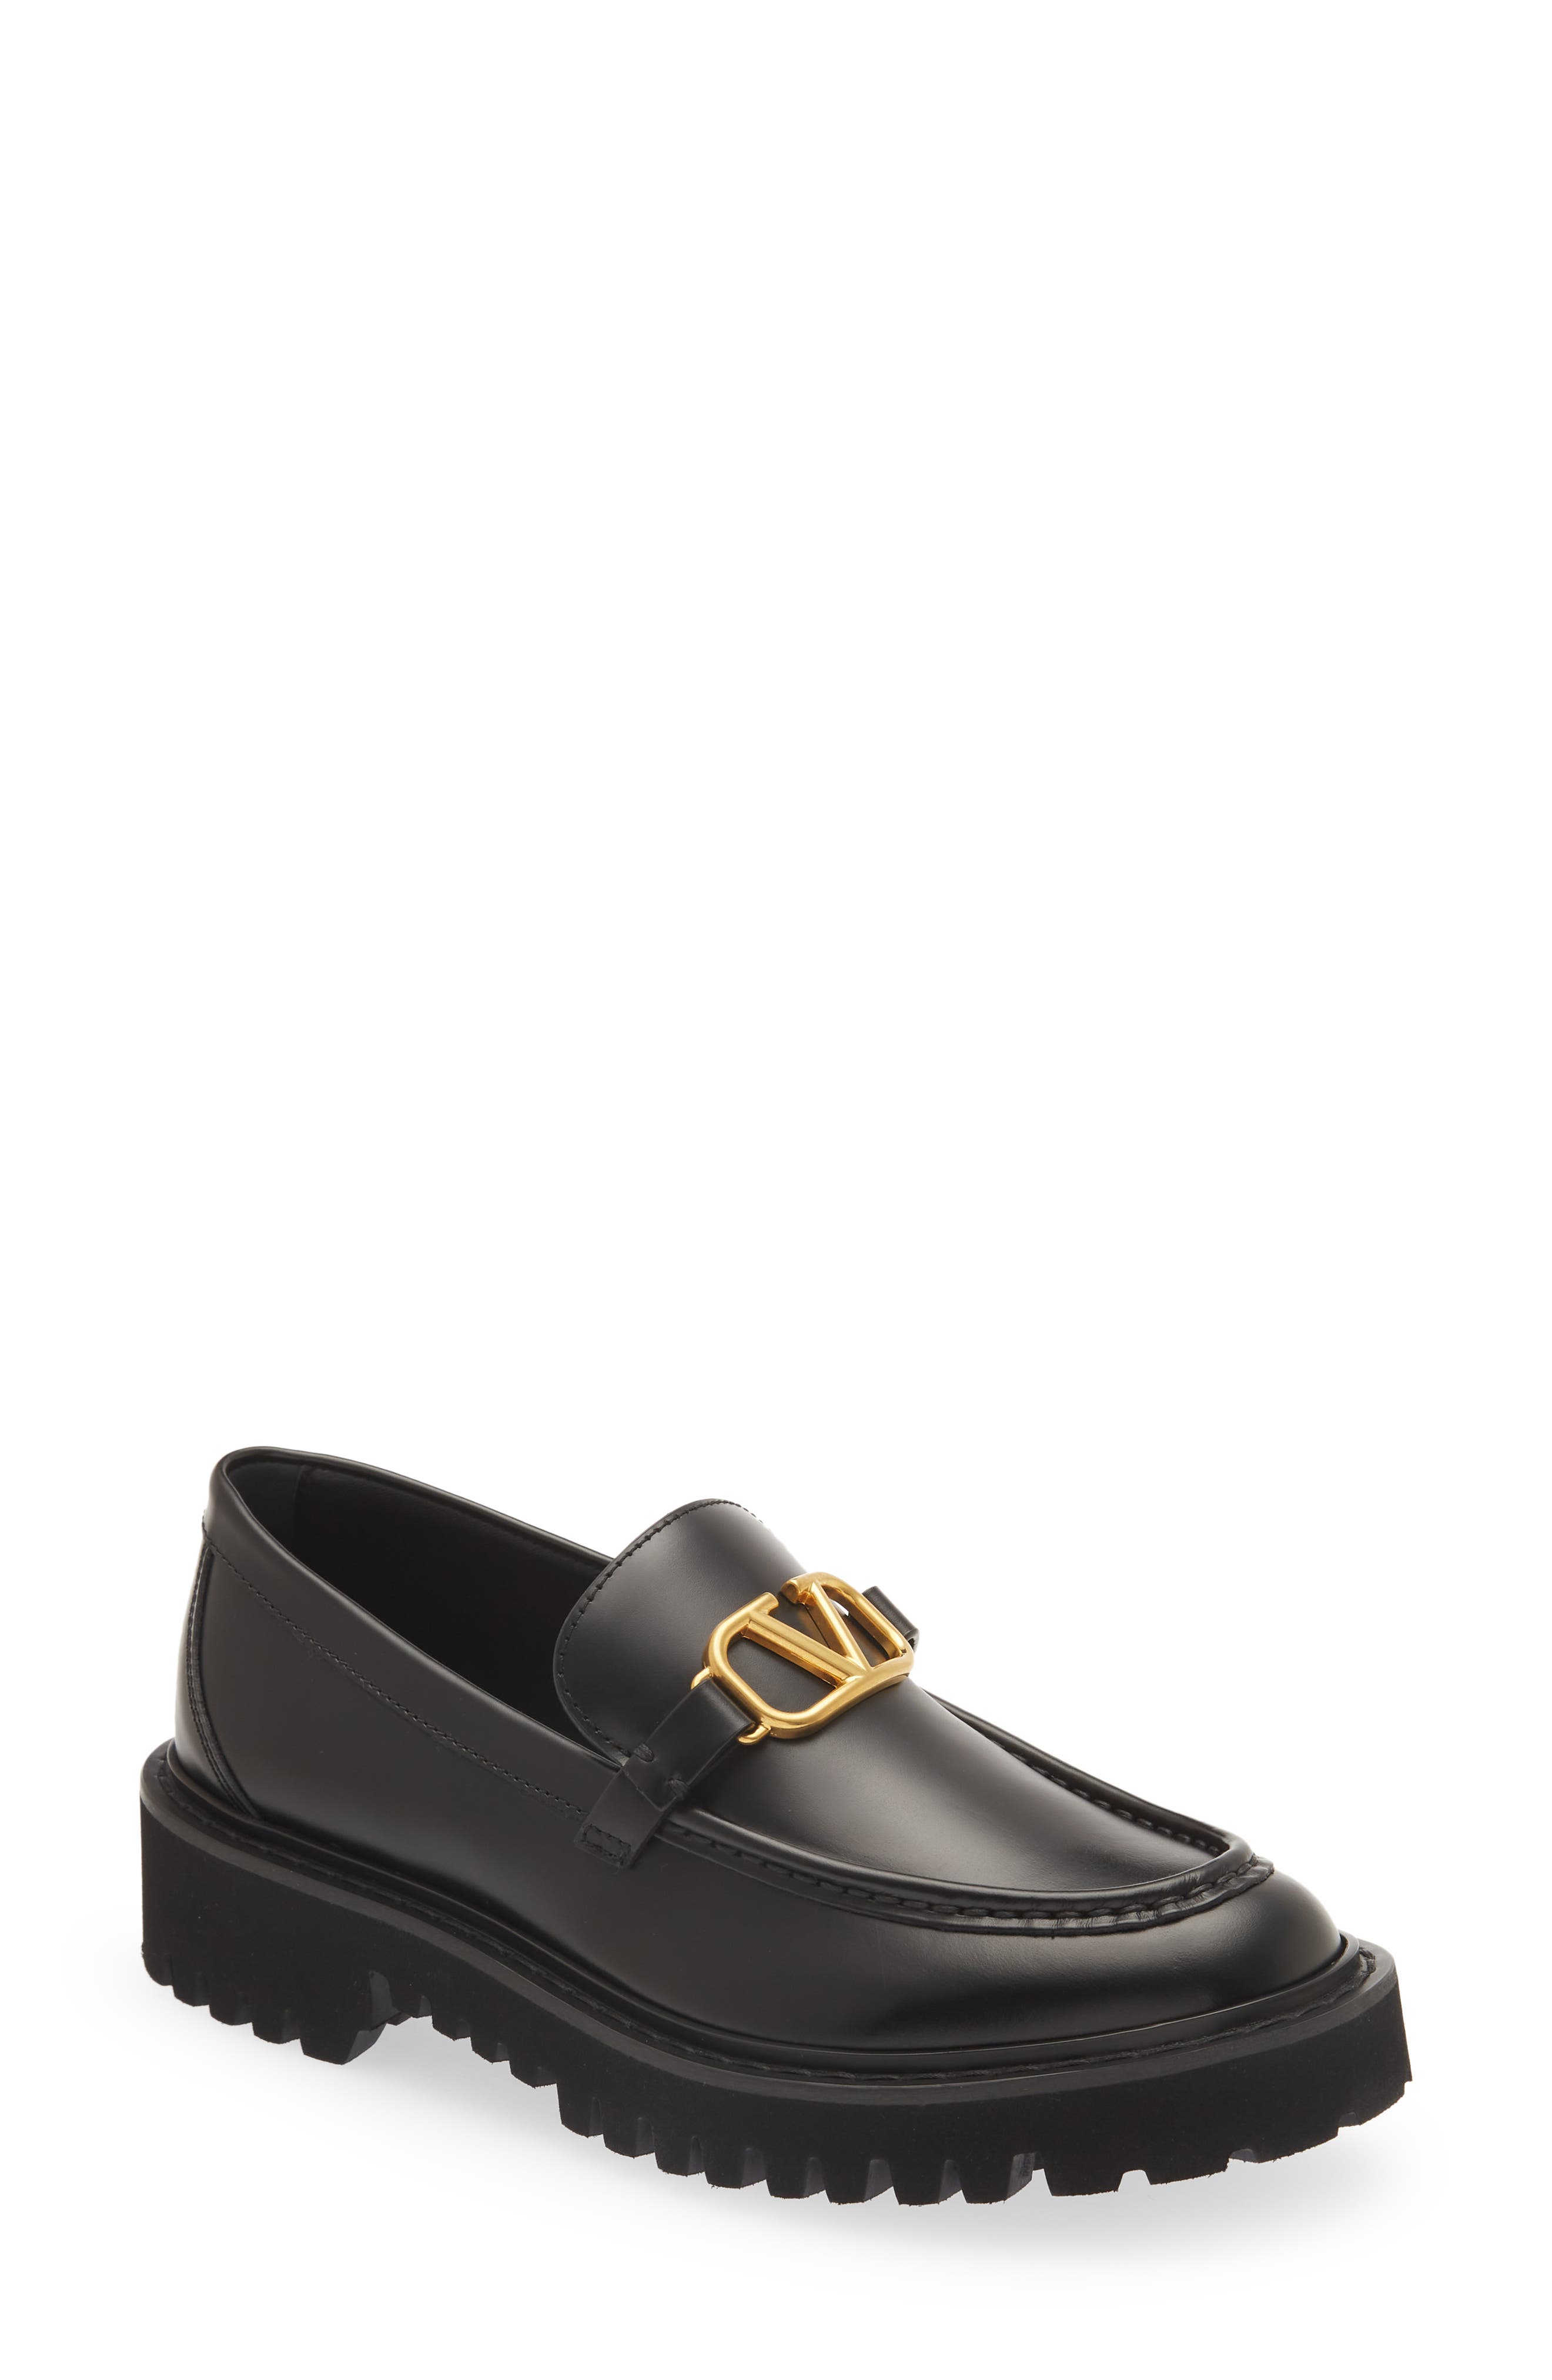 VLogo Signature leather loafers